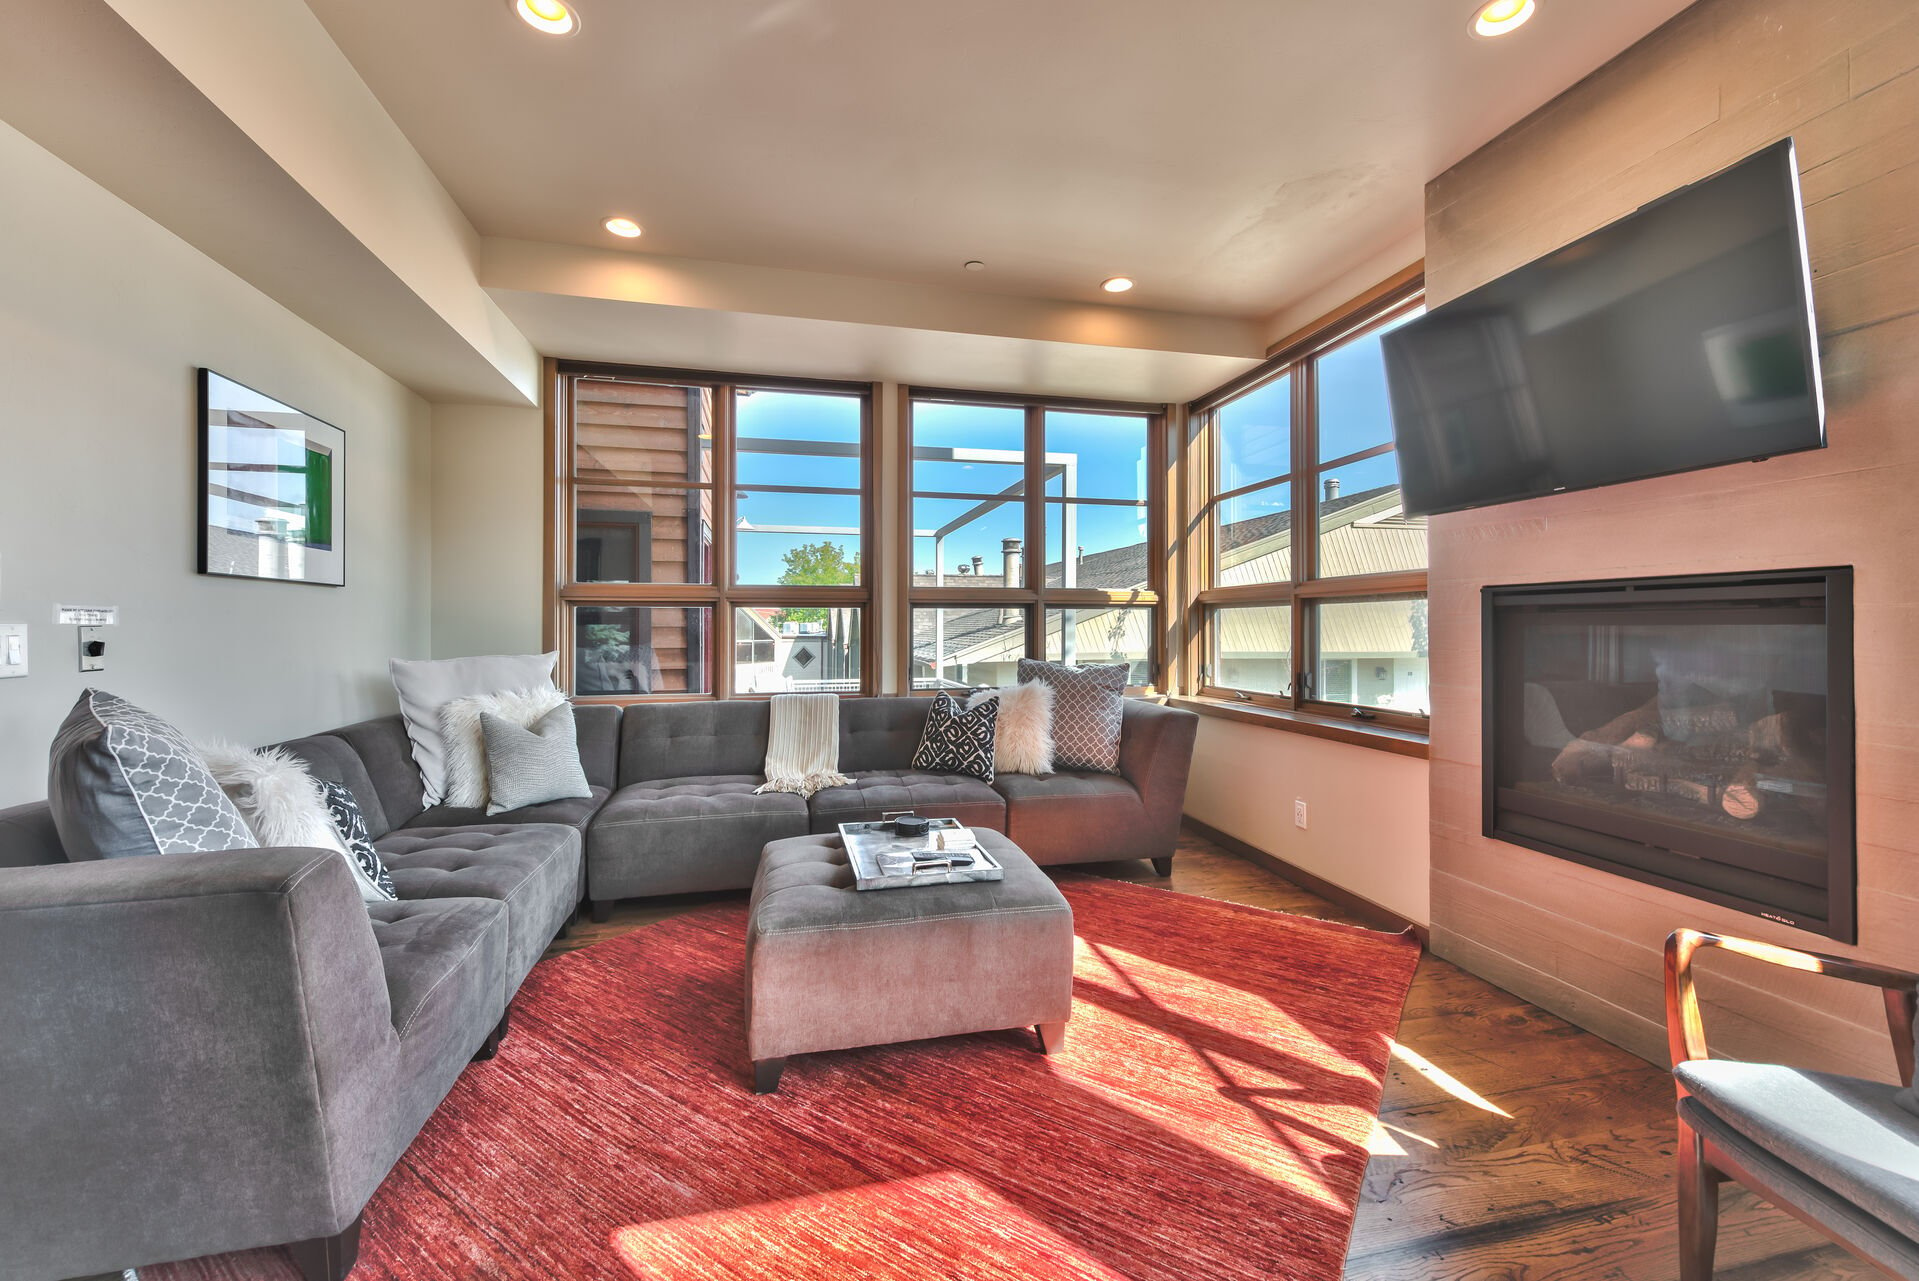 Level 2 - Living Room with Contemporary Furnishings, Gas Fireplace, TV, and Mountain Views